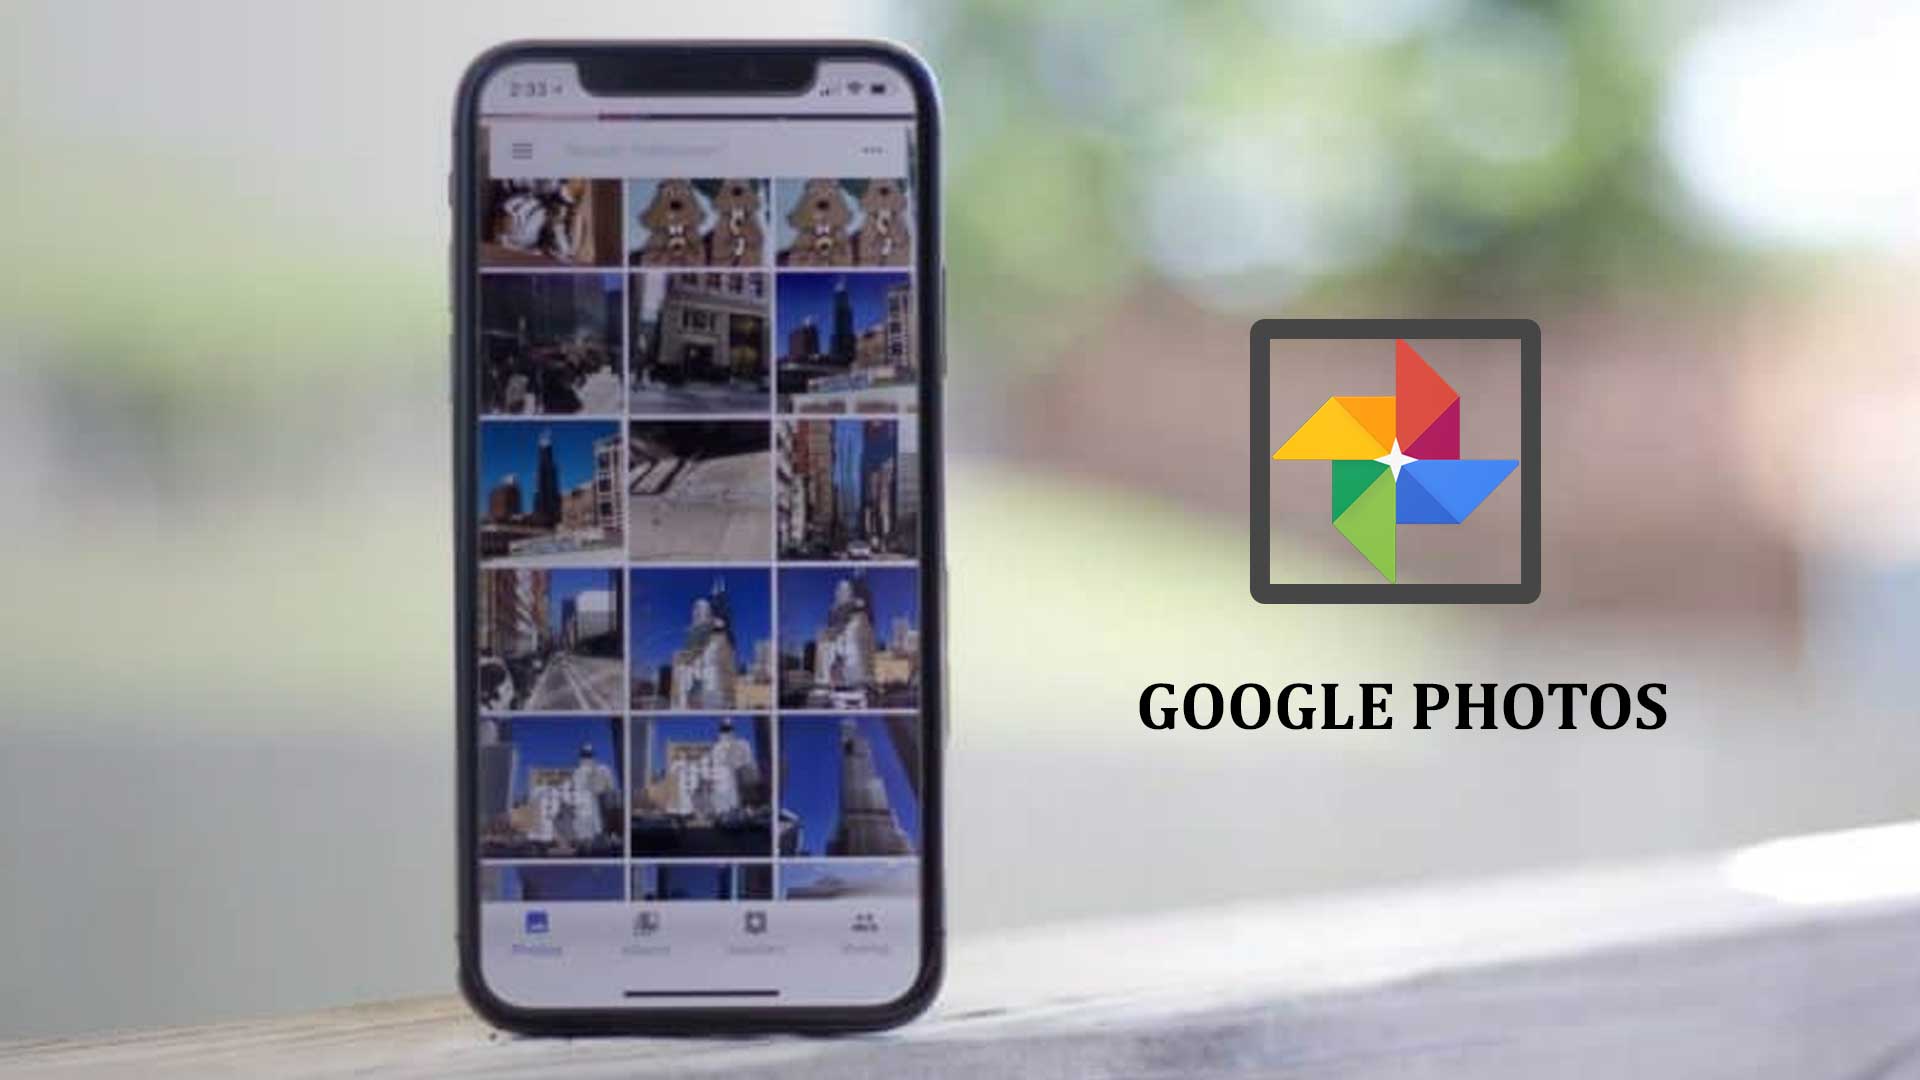 How to unsync Google Photos from iPhone